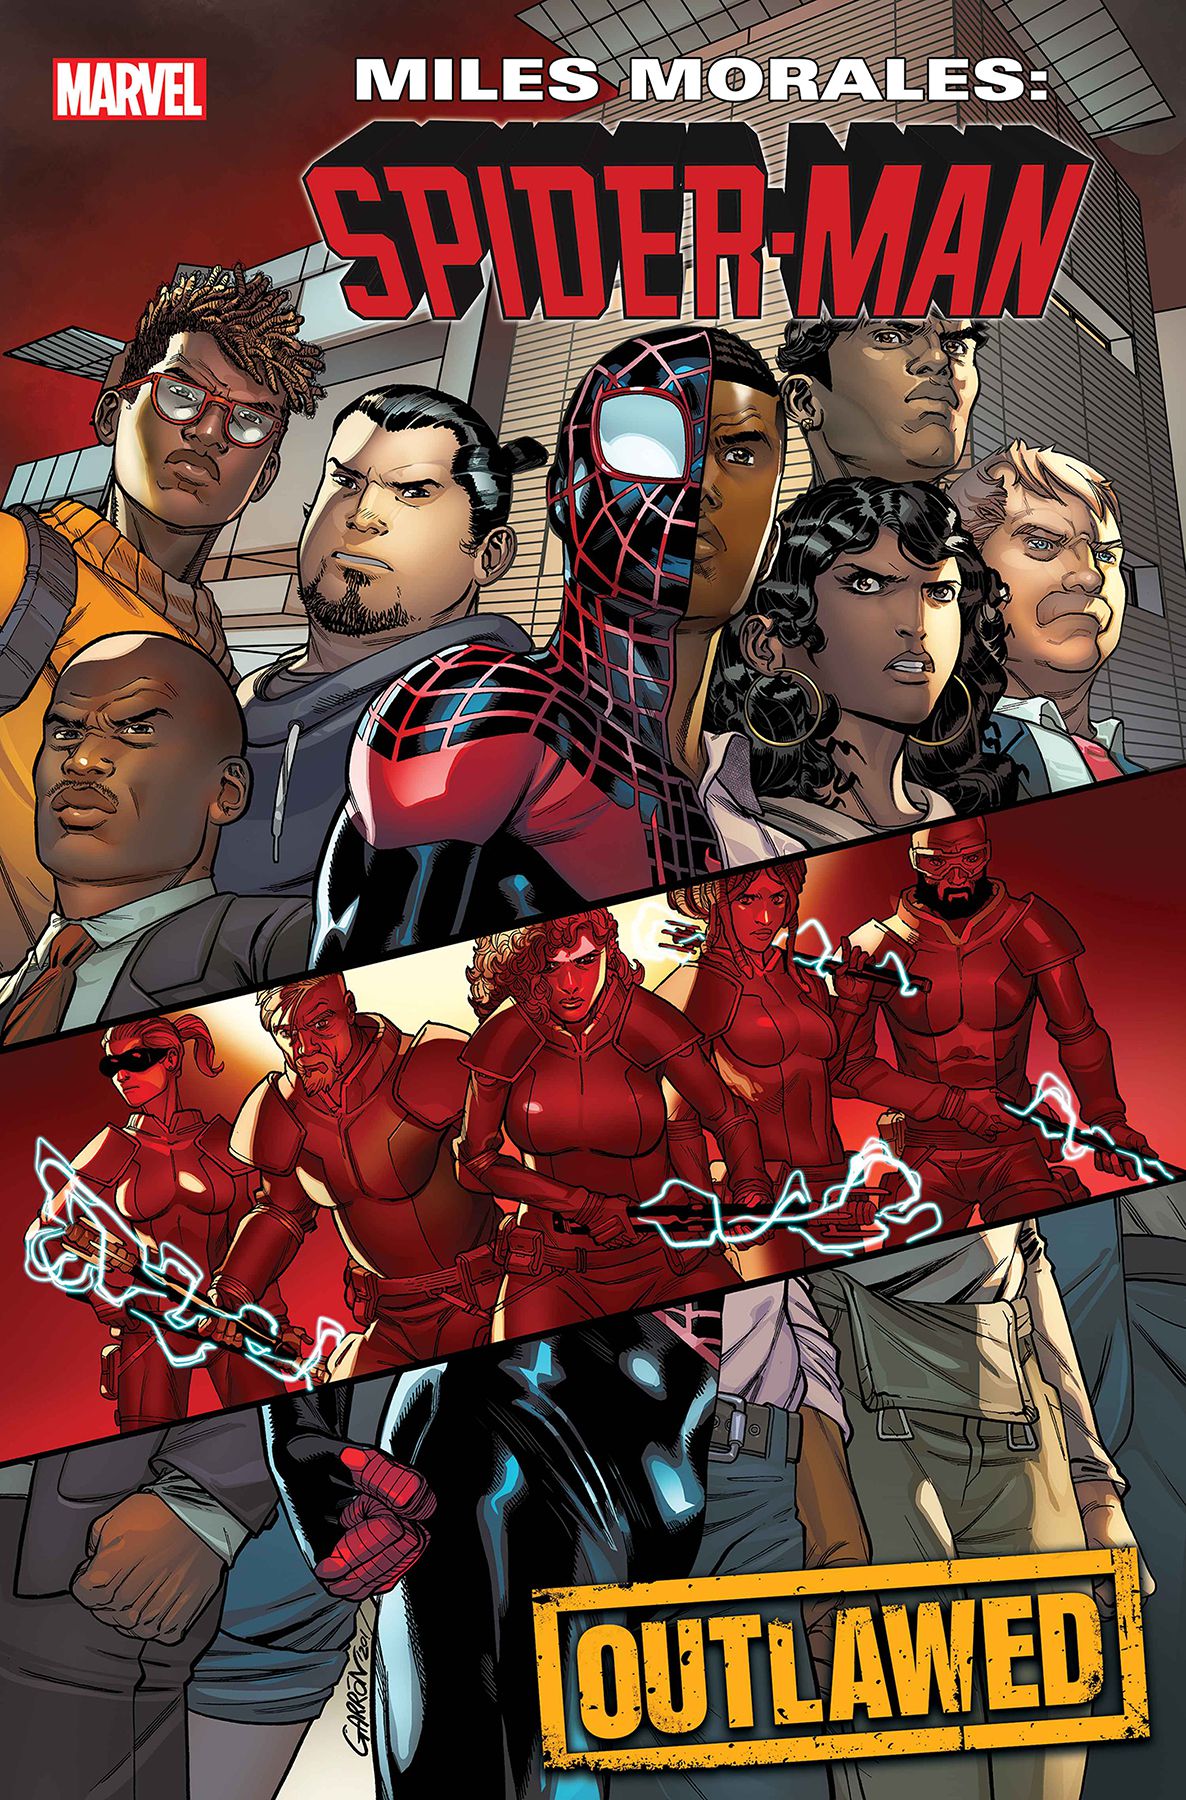 Miles Morales/Spider-Man stands with the folks who know his secret identity on the cover of Miles Morales: Spider-Man #18, Marvel Comics (2020).